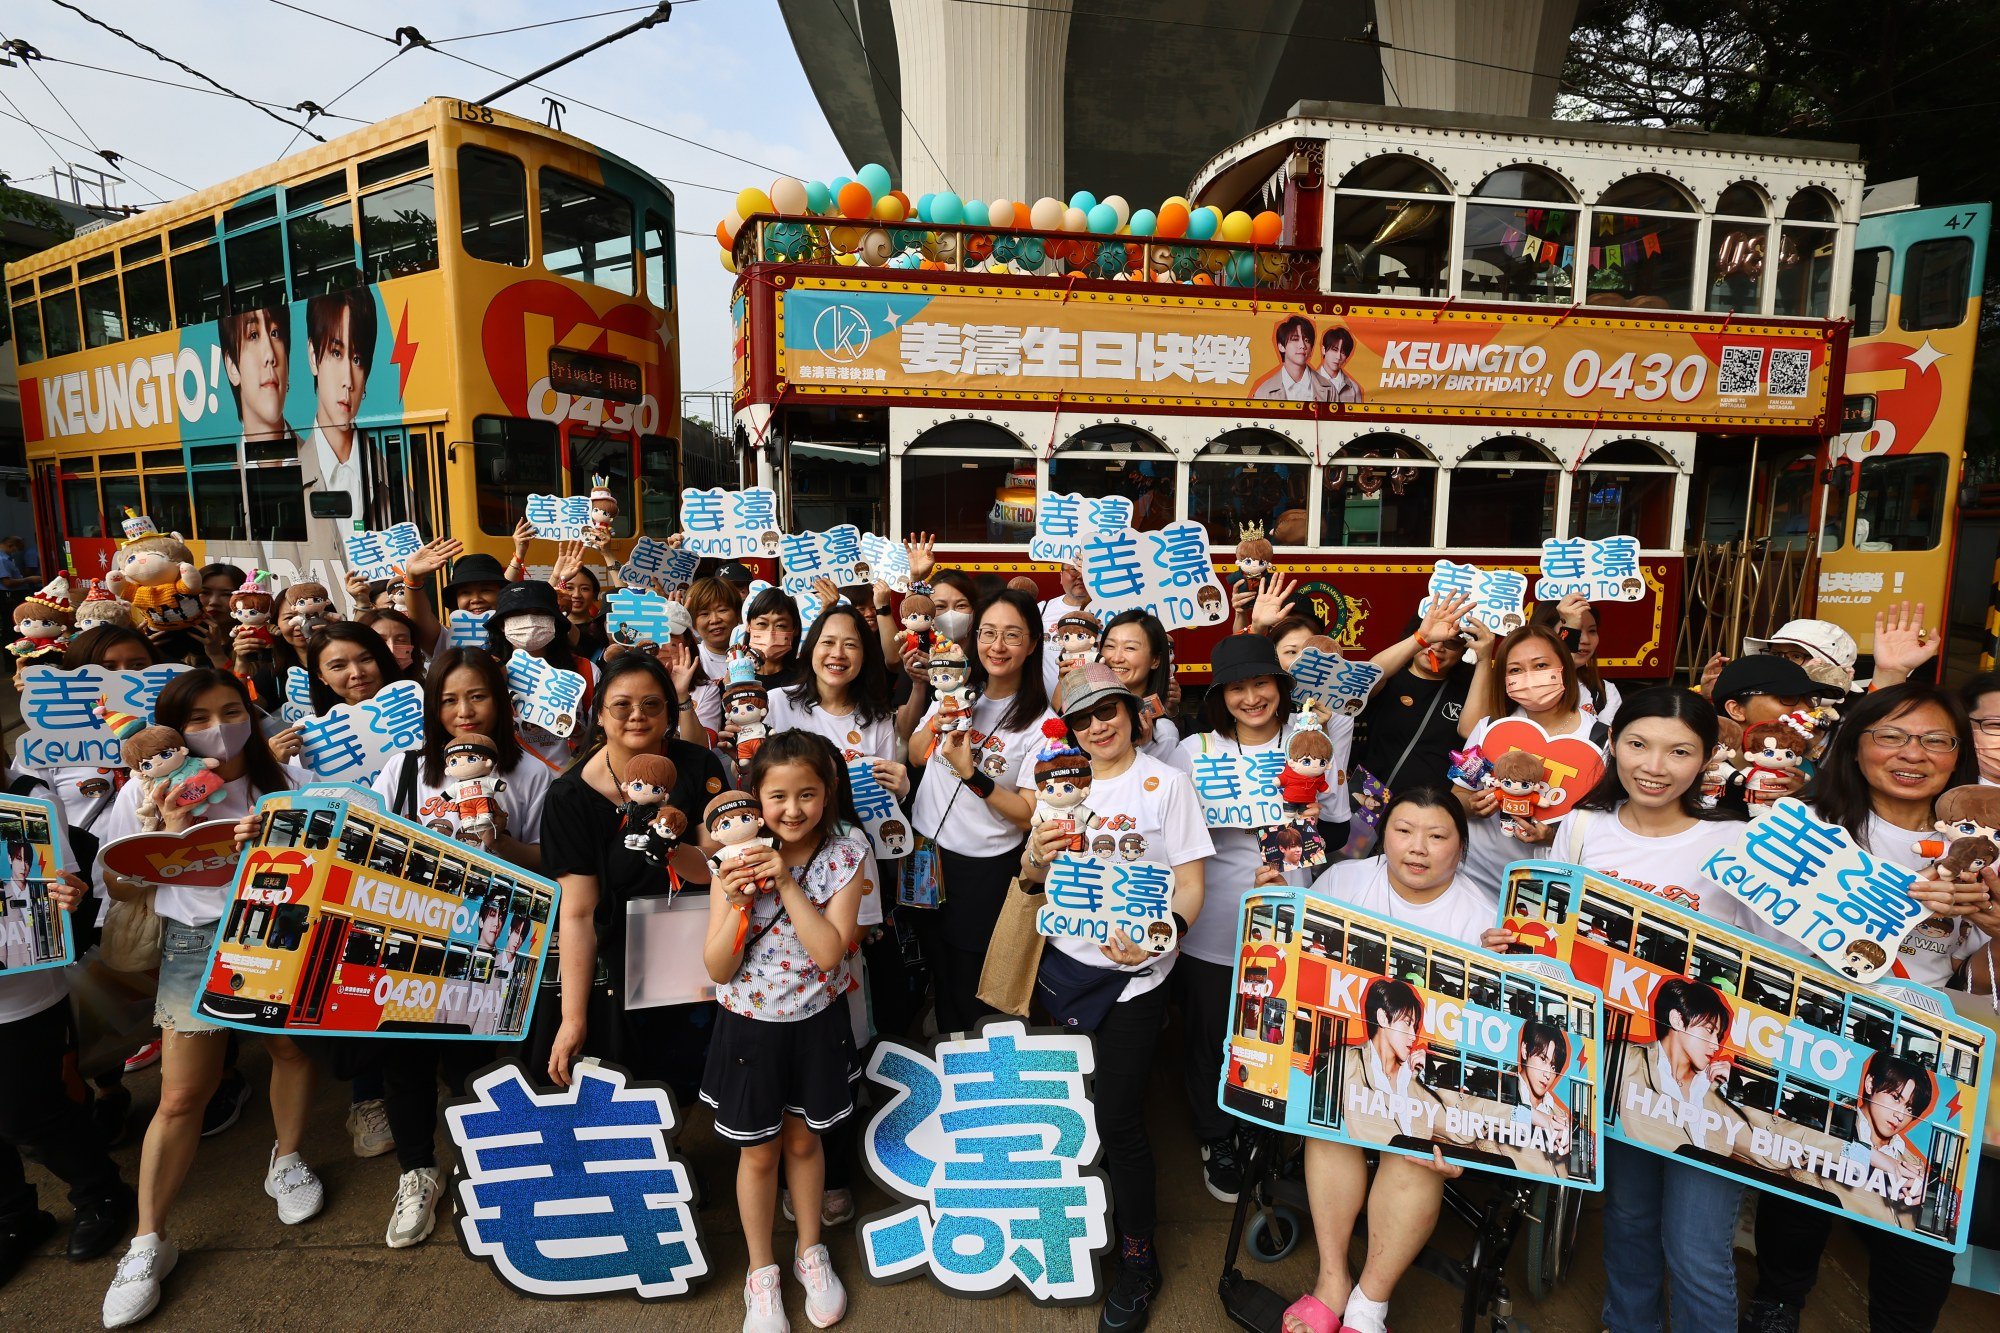 Fans splash out on tram rides and advertisements to celebrate Keung To’s birthday in April. Photo: Dickson Lee